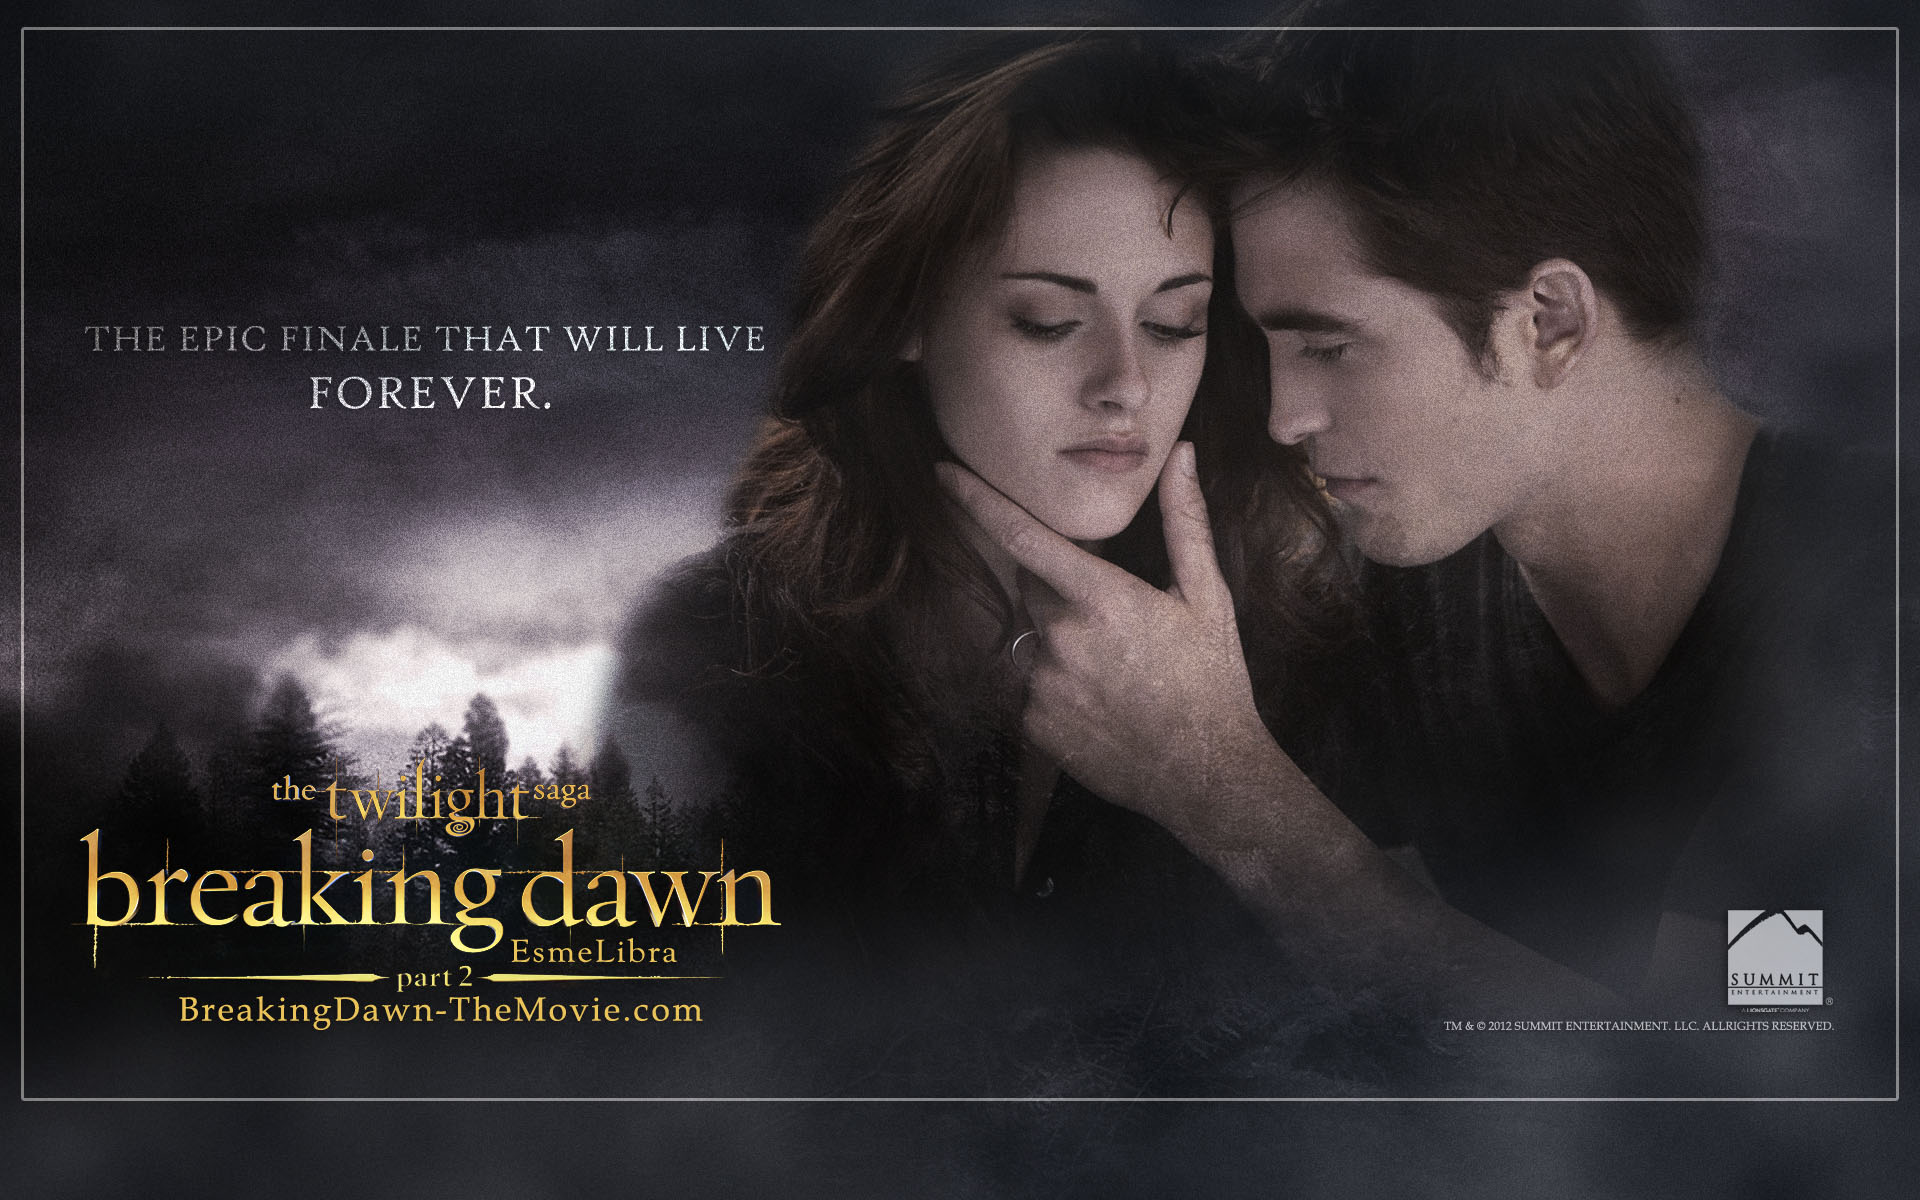  Breaking Dawn Part 2 Wallpaper HD wallpaper and background photos